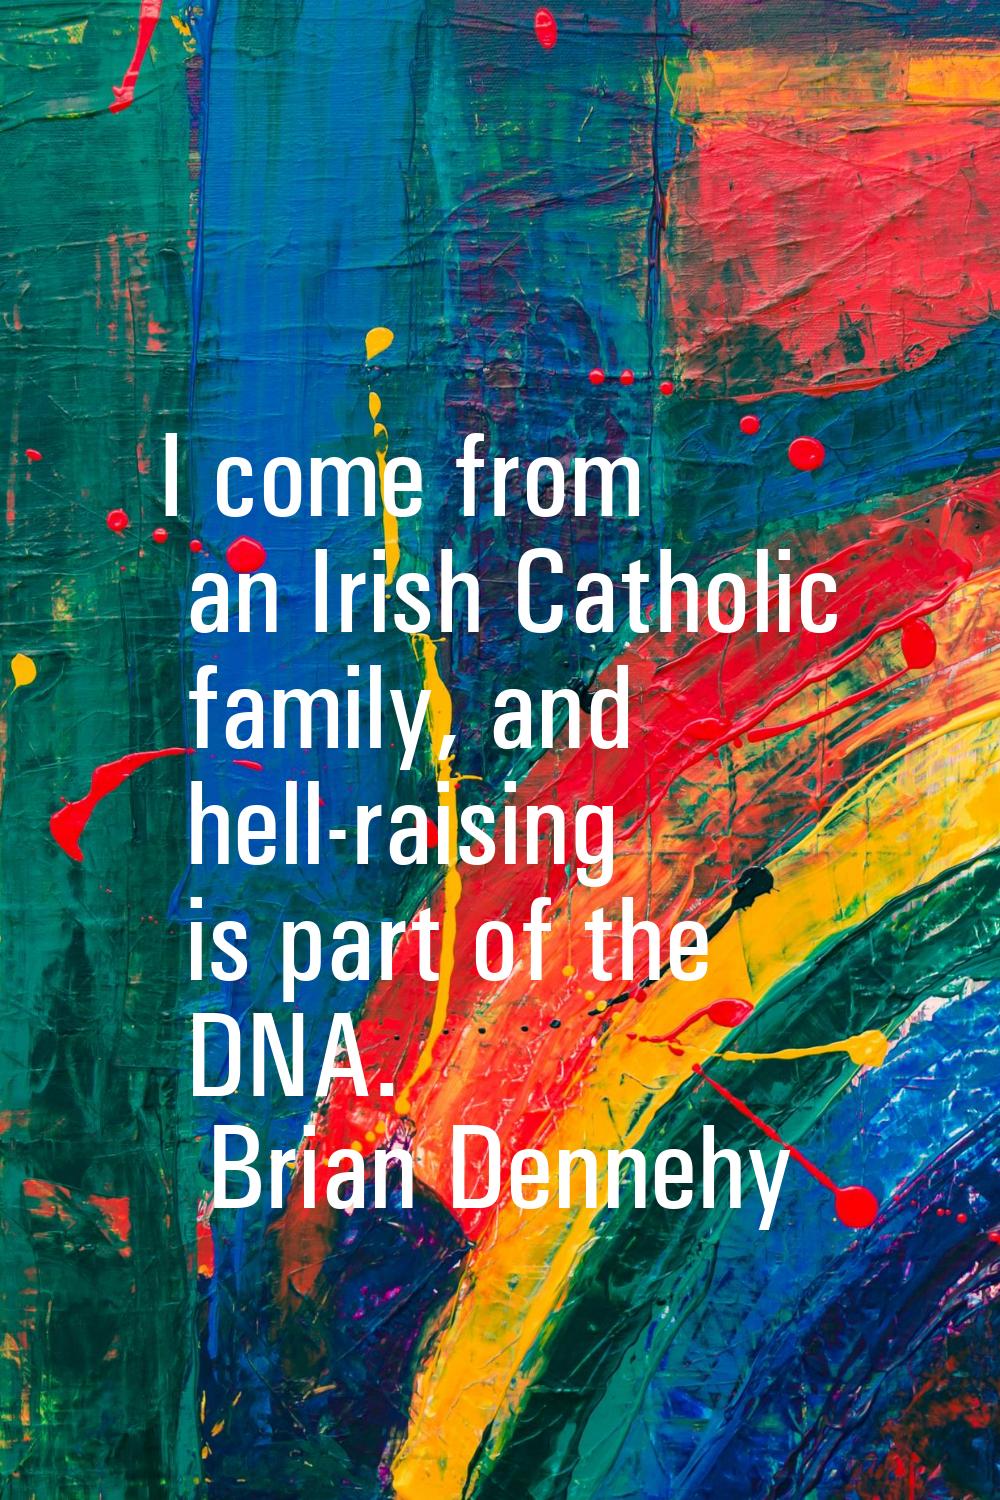 I come from an Irish Catholic family, and hell-raising is part of the DNA.